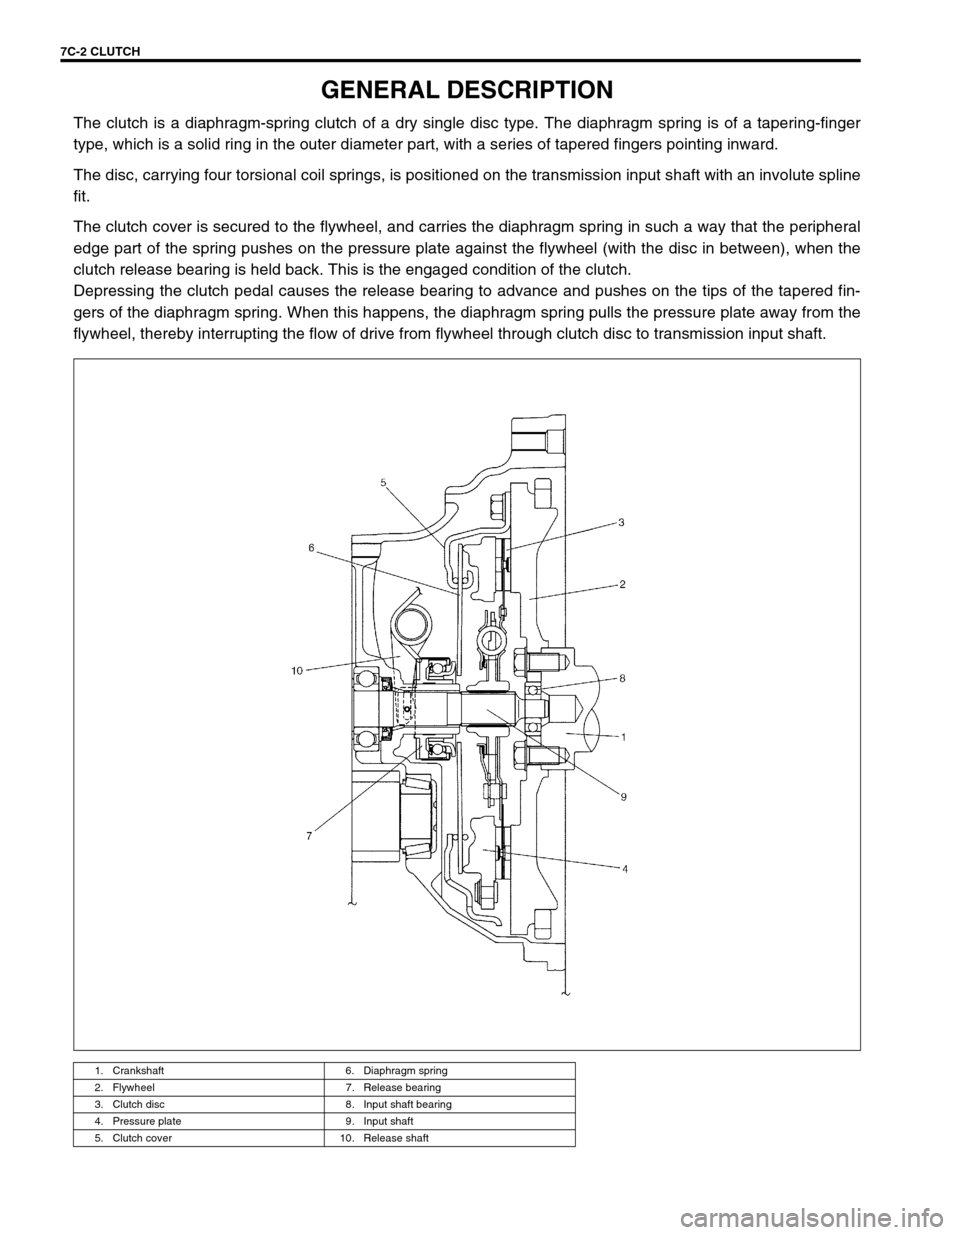 SUZUKI SWIFT 2000 1.G Transmission Service Workshop Manual 7C-2 CLUTCH
GENERAL DESCRIPTION
The clutch is a diaphragm-spring clutch of a dry single disc type. The diaphragm spring is of a tapering-finger
type, which is a solid ring in the outer diameter part, 